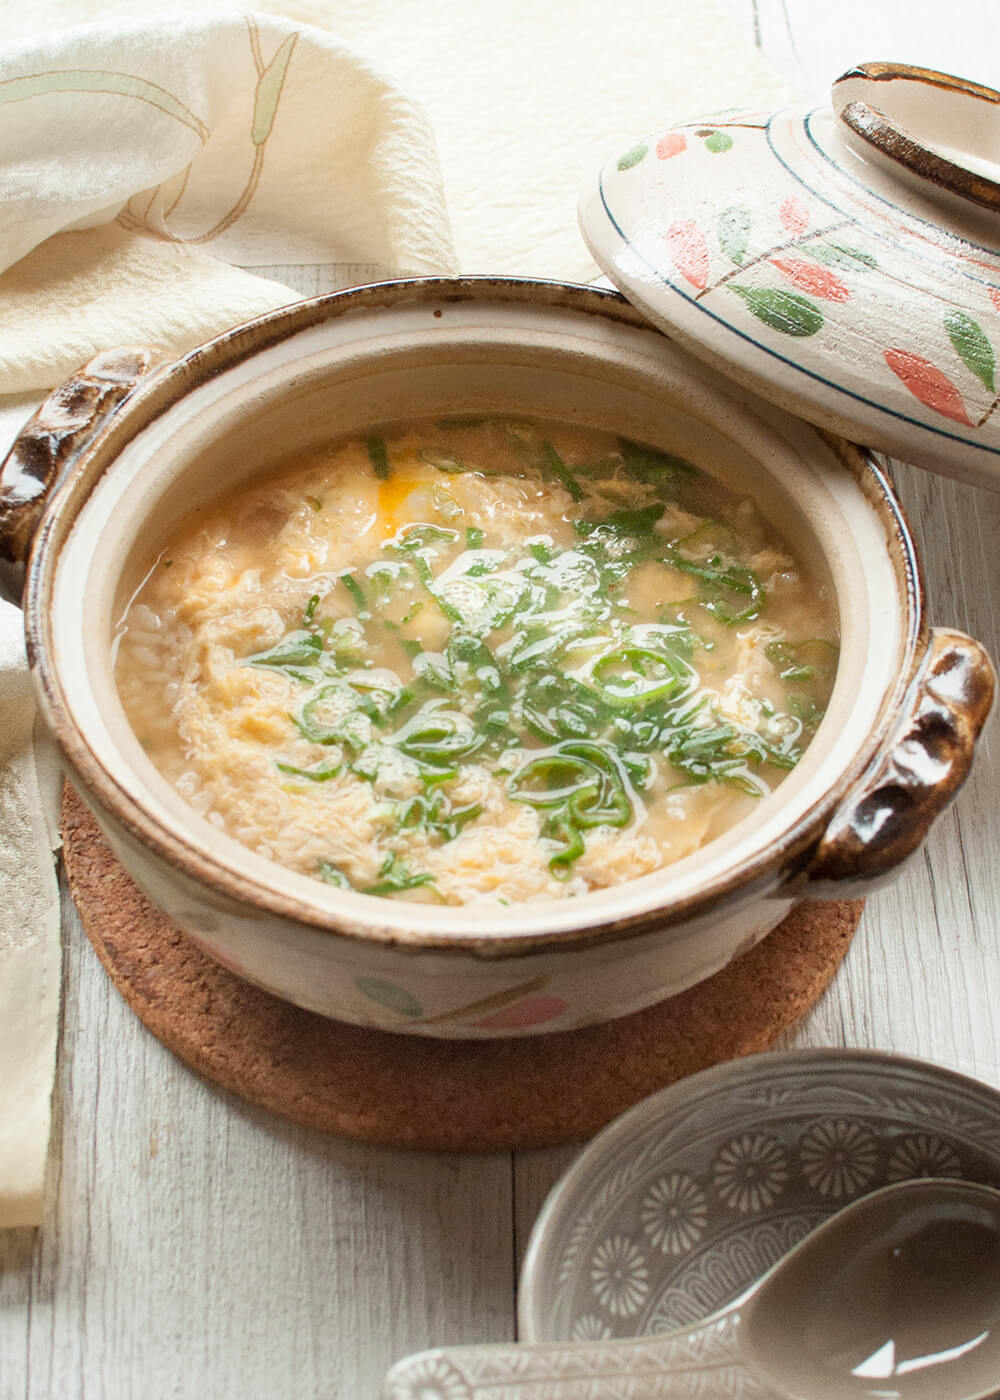 Zosui (雑炊) is a Japanese version of congee. Rice is cooked in flavoured soup with vegetables, egg and sometimes meat or fish. It is often made using the soup from the hot pot to wrap up the wonderful meal of the day. You can imagine how good the soup from the hot pot would be, can’t you?